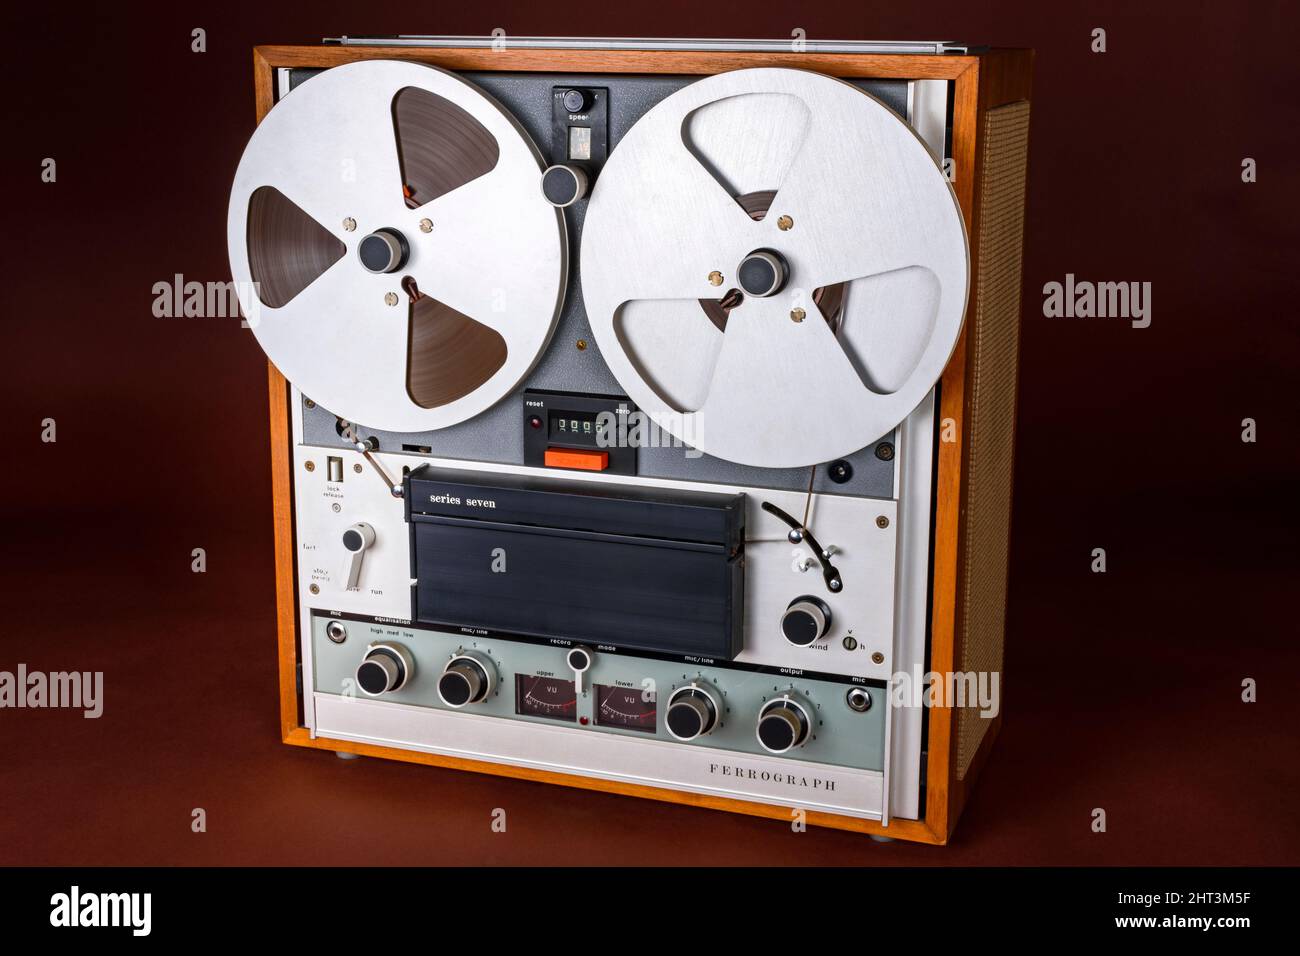 https://c8.alamy.com/comp/2HT3M5F/ferrograph-series-7-reel-to-reel-tape-recorder-produced-in-the-uk-between-1968-and-1974-2HT3M5F.jpg